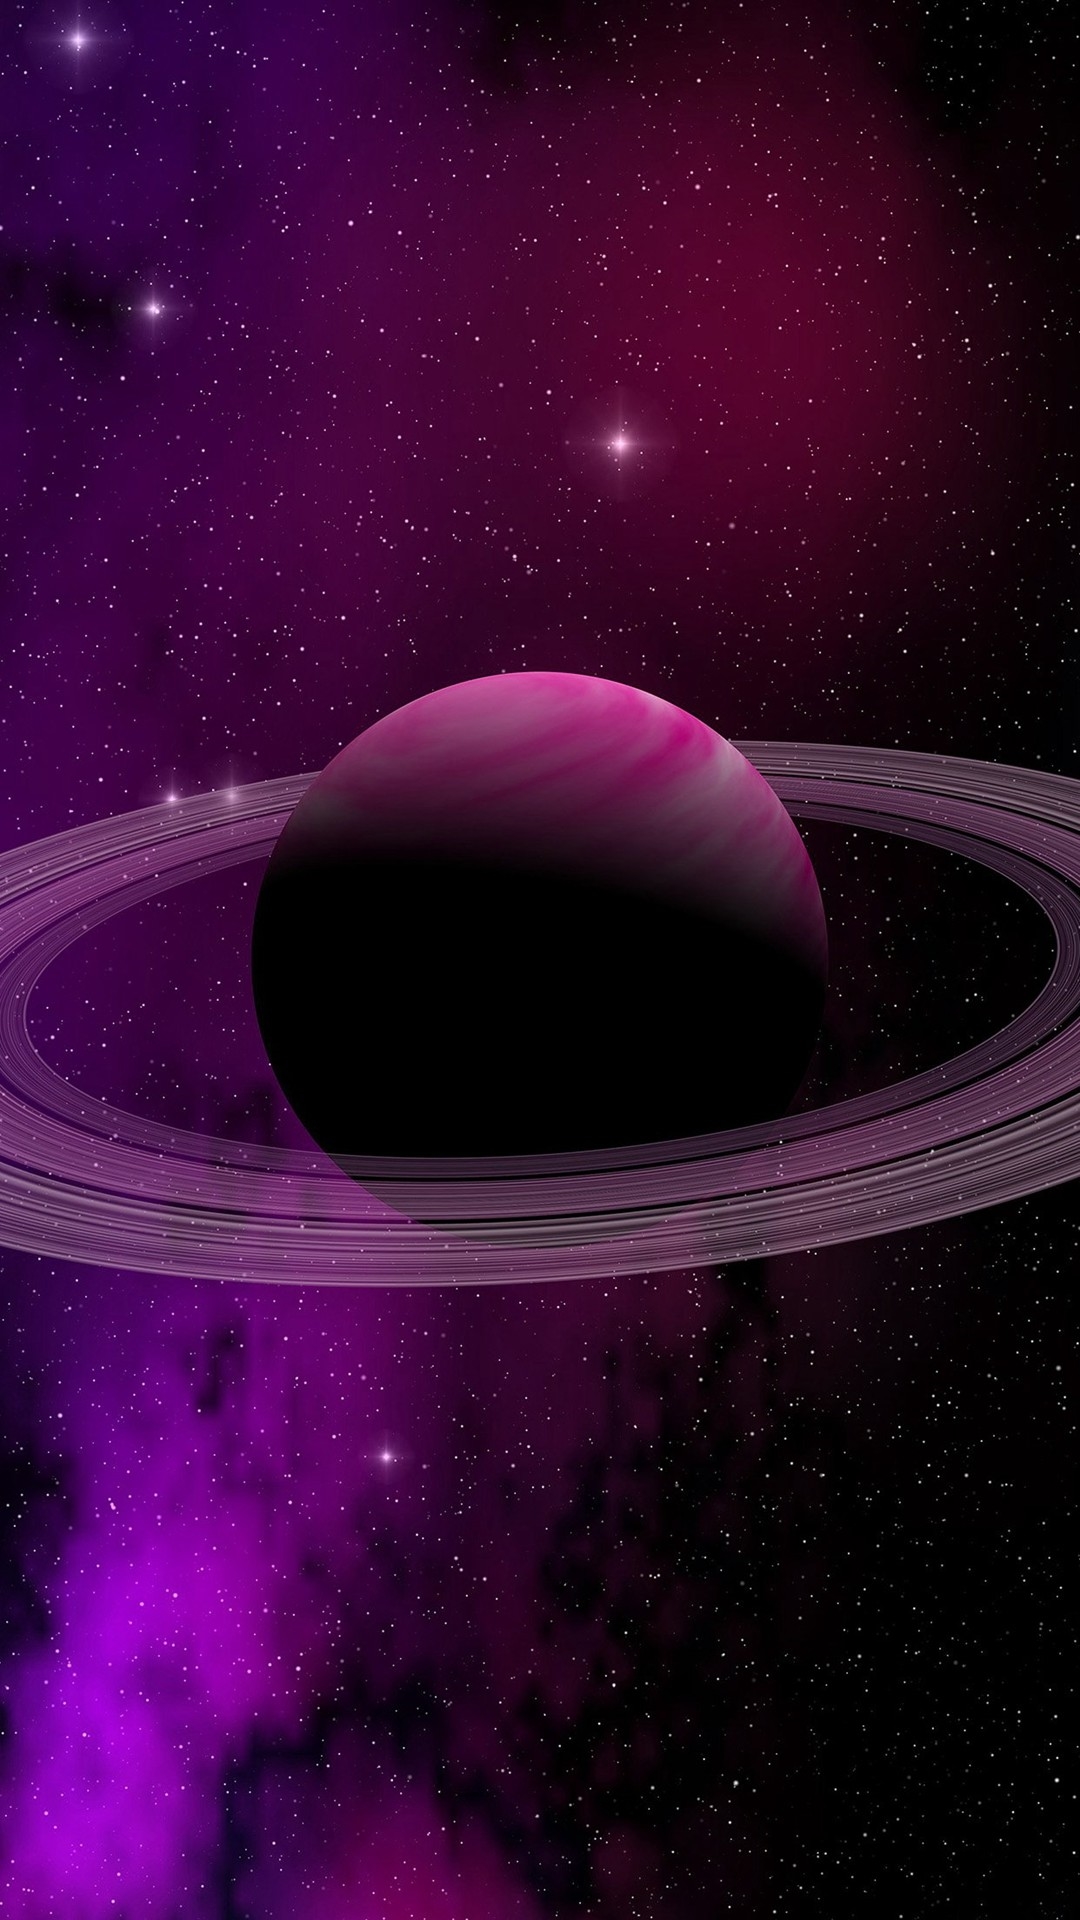 Saturn wallpaper for android